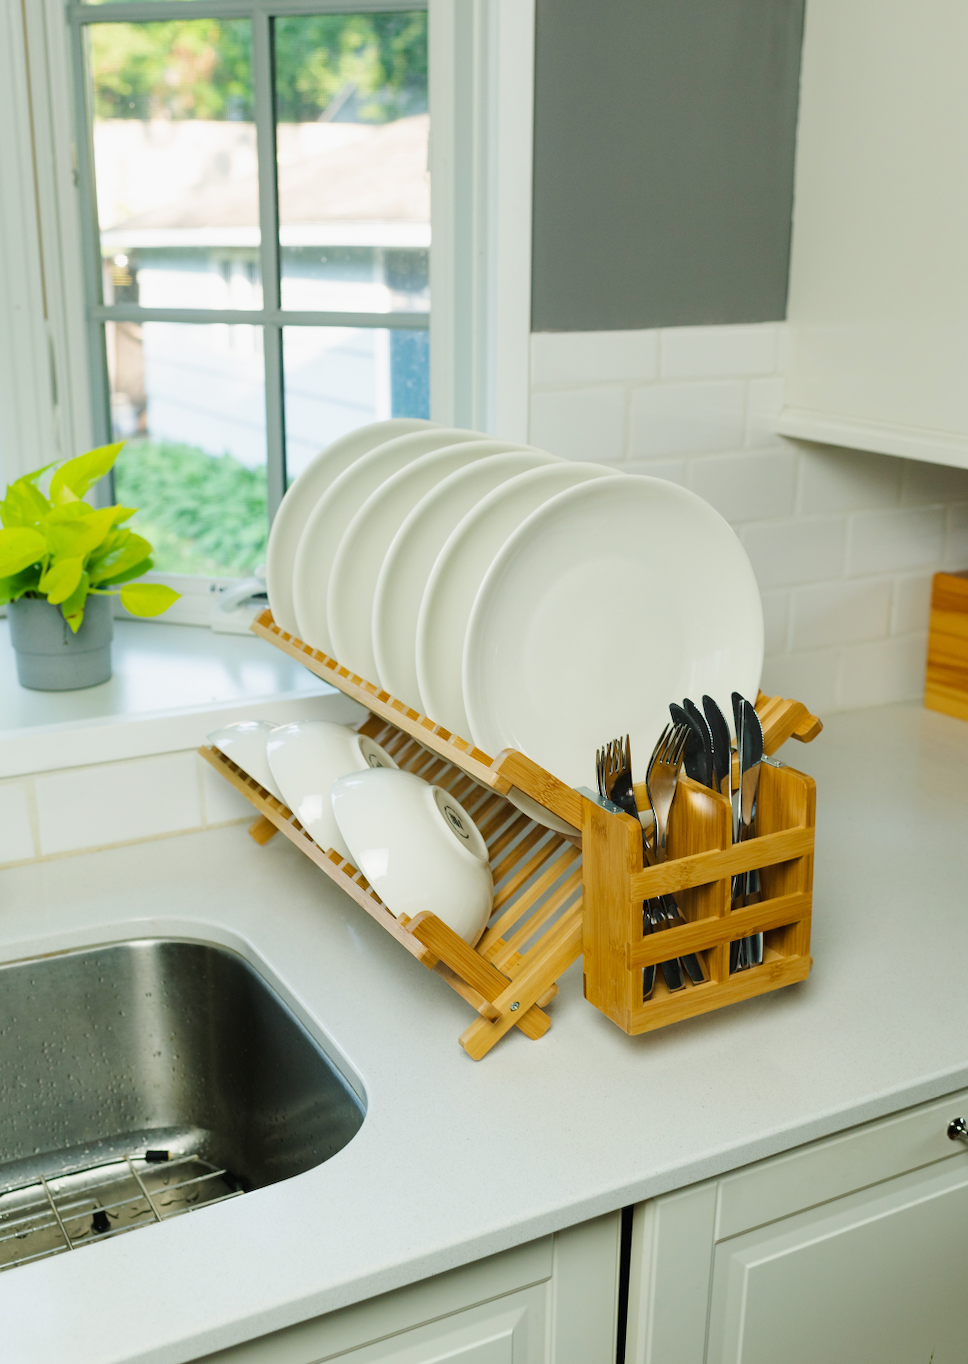 Bamboo Collapsible Drying Rack with Utensil Caddy